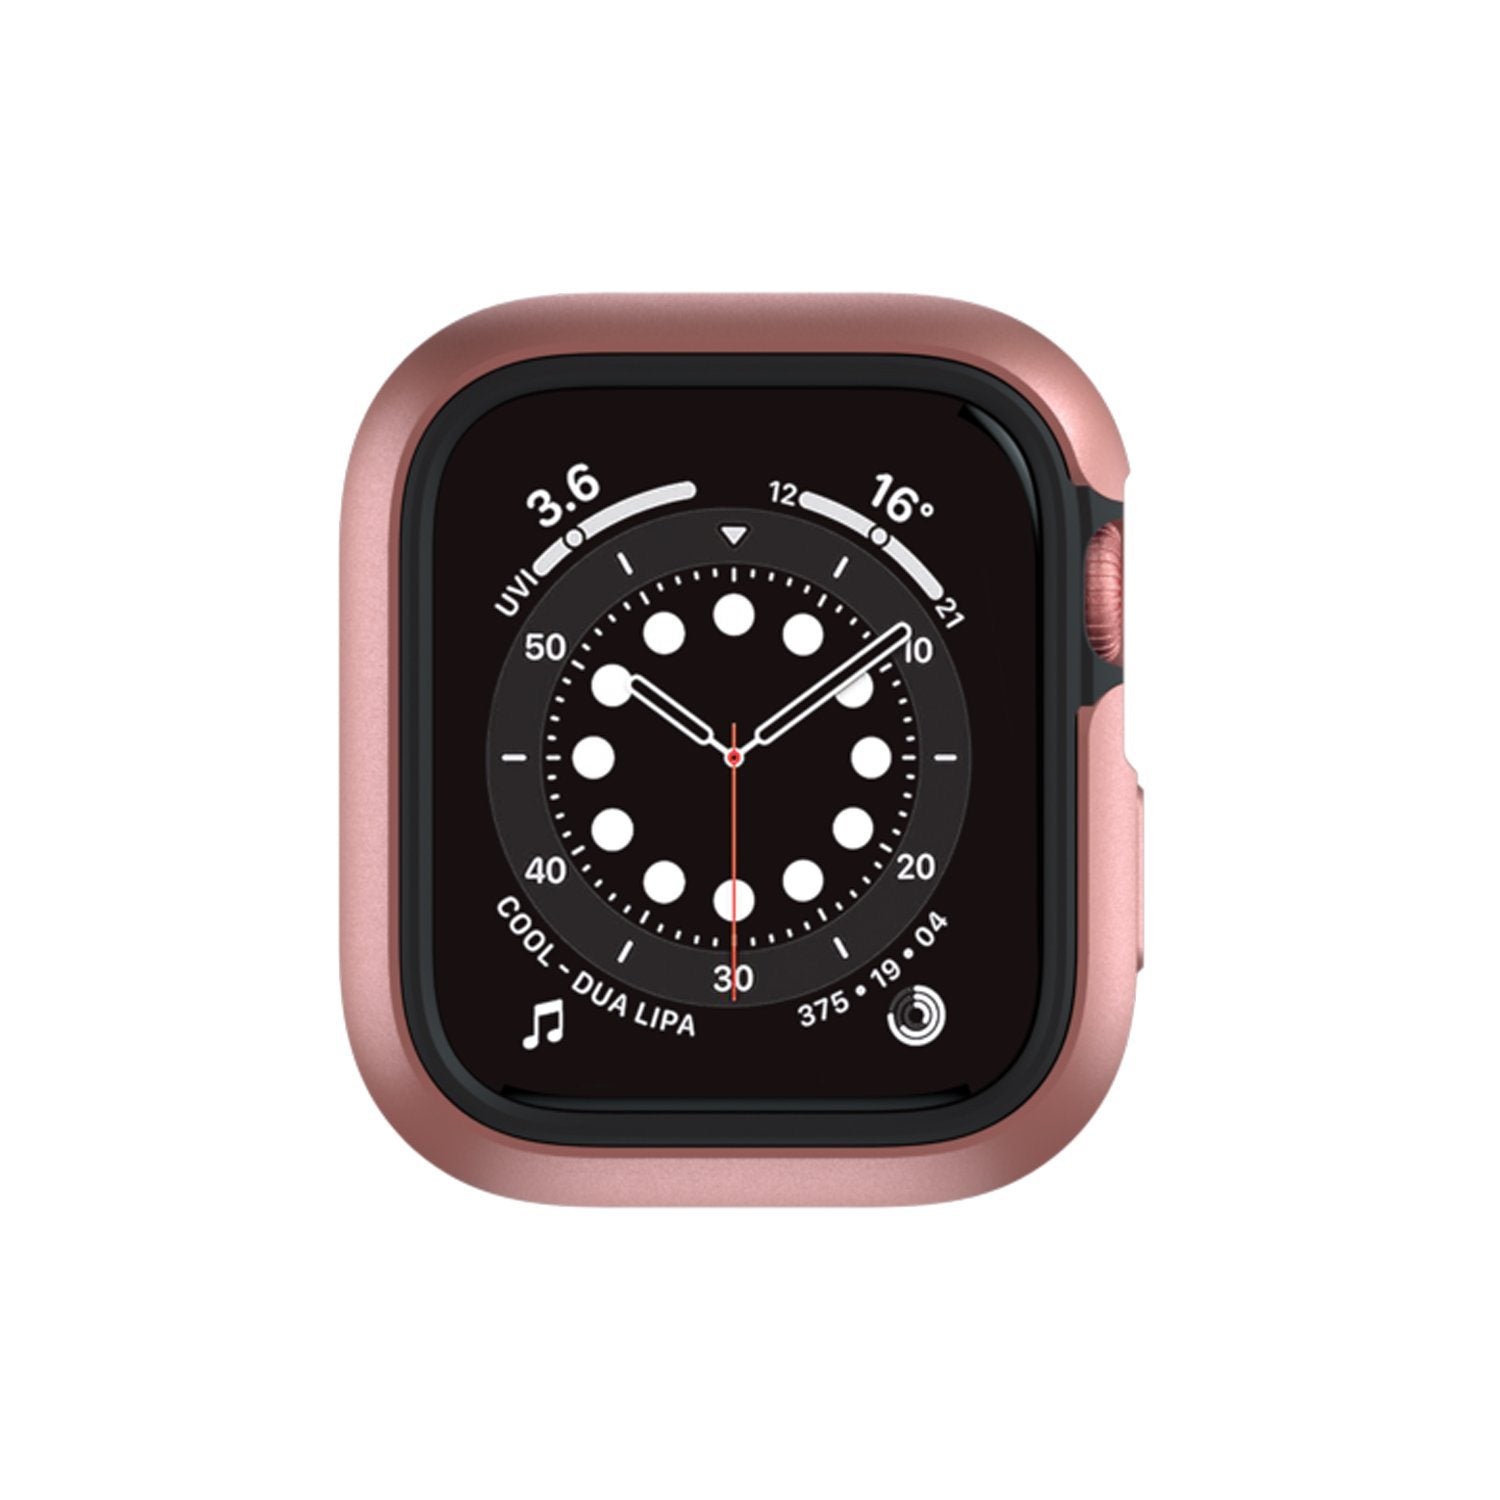 Switcheasy Odyssey Case for Apple Watch Series 4/5/6/SE 40mm, Space Rose Gold Default Switcheasy 